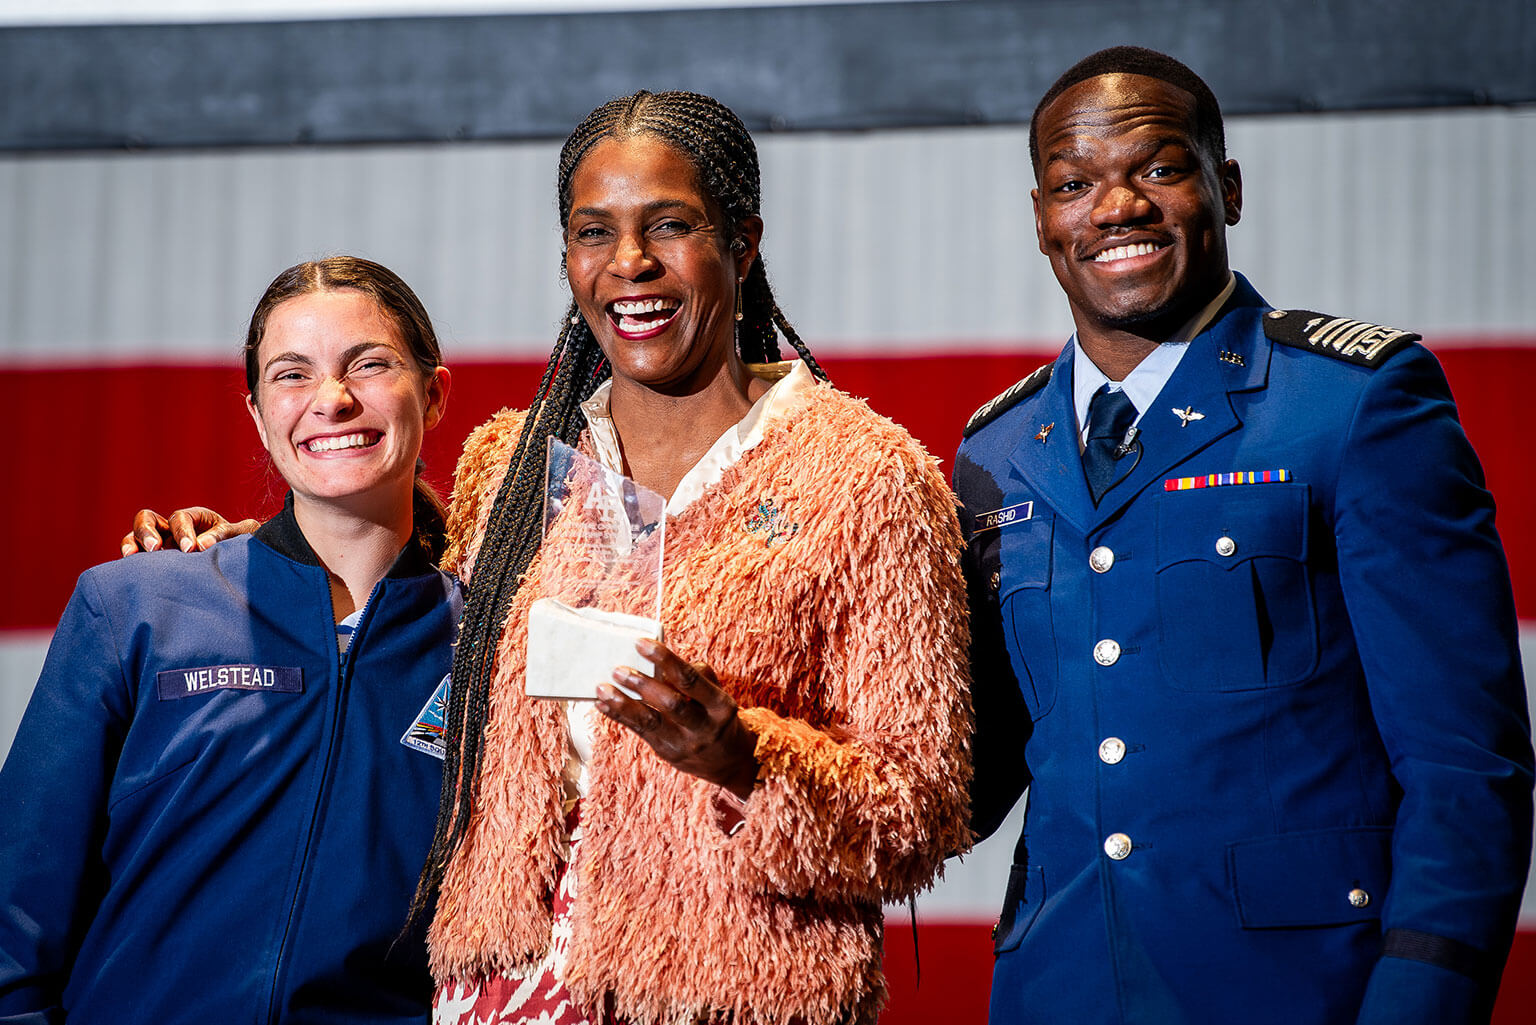 Cadet 2nd Class Samantha Welstead, left, Wounded Warrior Project’s Warriors Speak spokesperson Tonya Oxendine, and Cadet 1st Class Nasir Rashid pose for a photo after the National Character and Leadership Symposium Bridge Event in Arnold Hall Theater.